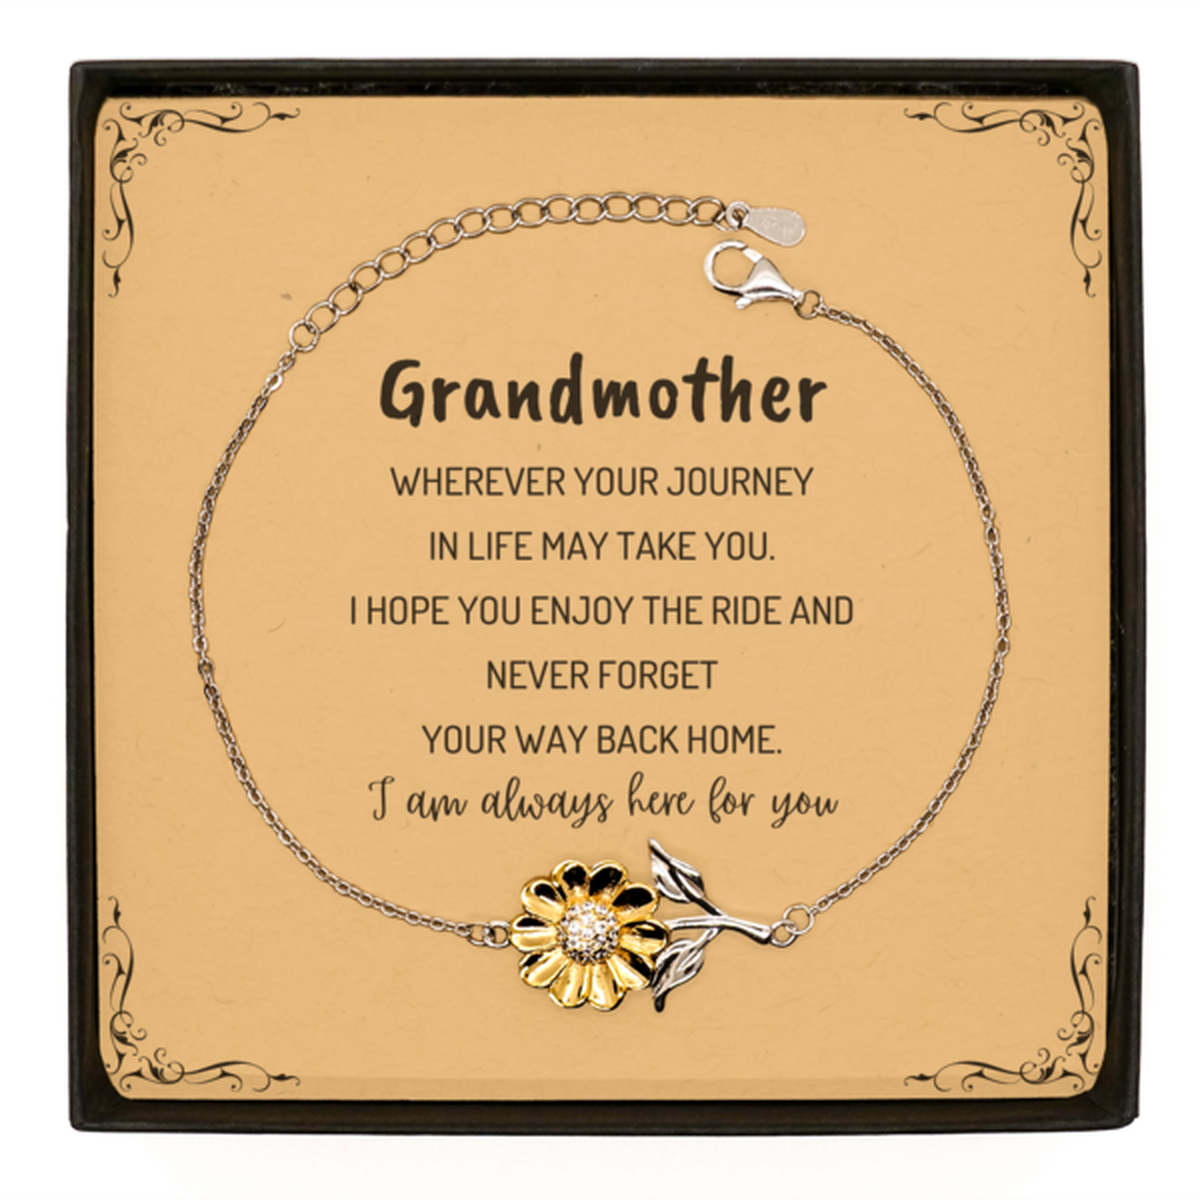 Grandmother wherever your journey in life may take you, I am always here for you Grandmother Sunflower Bracelet, Awesome Christmas Gifts For Grandmother Message Card, Grandmother Birthday Gifts for Men Women Family Loved One